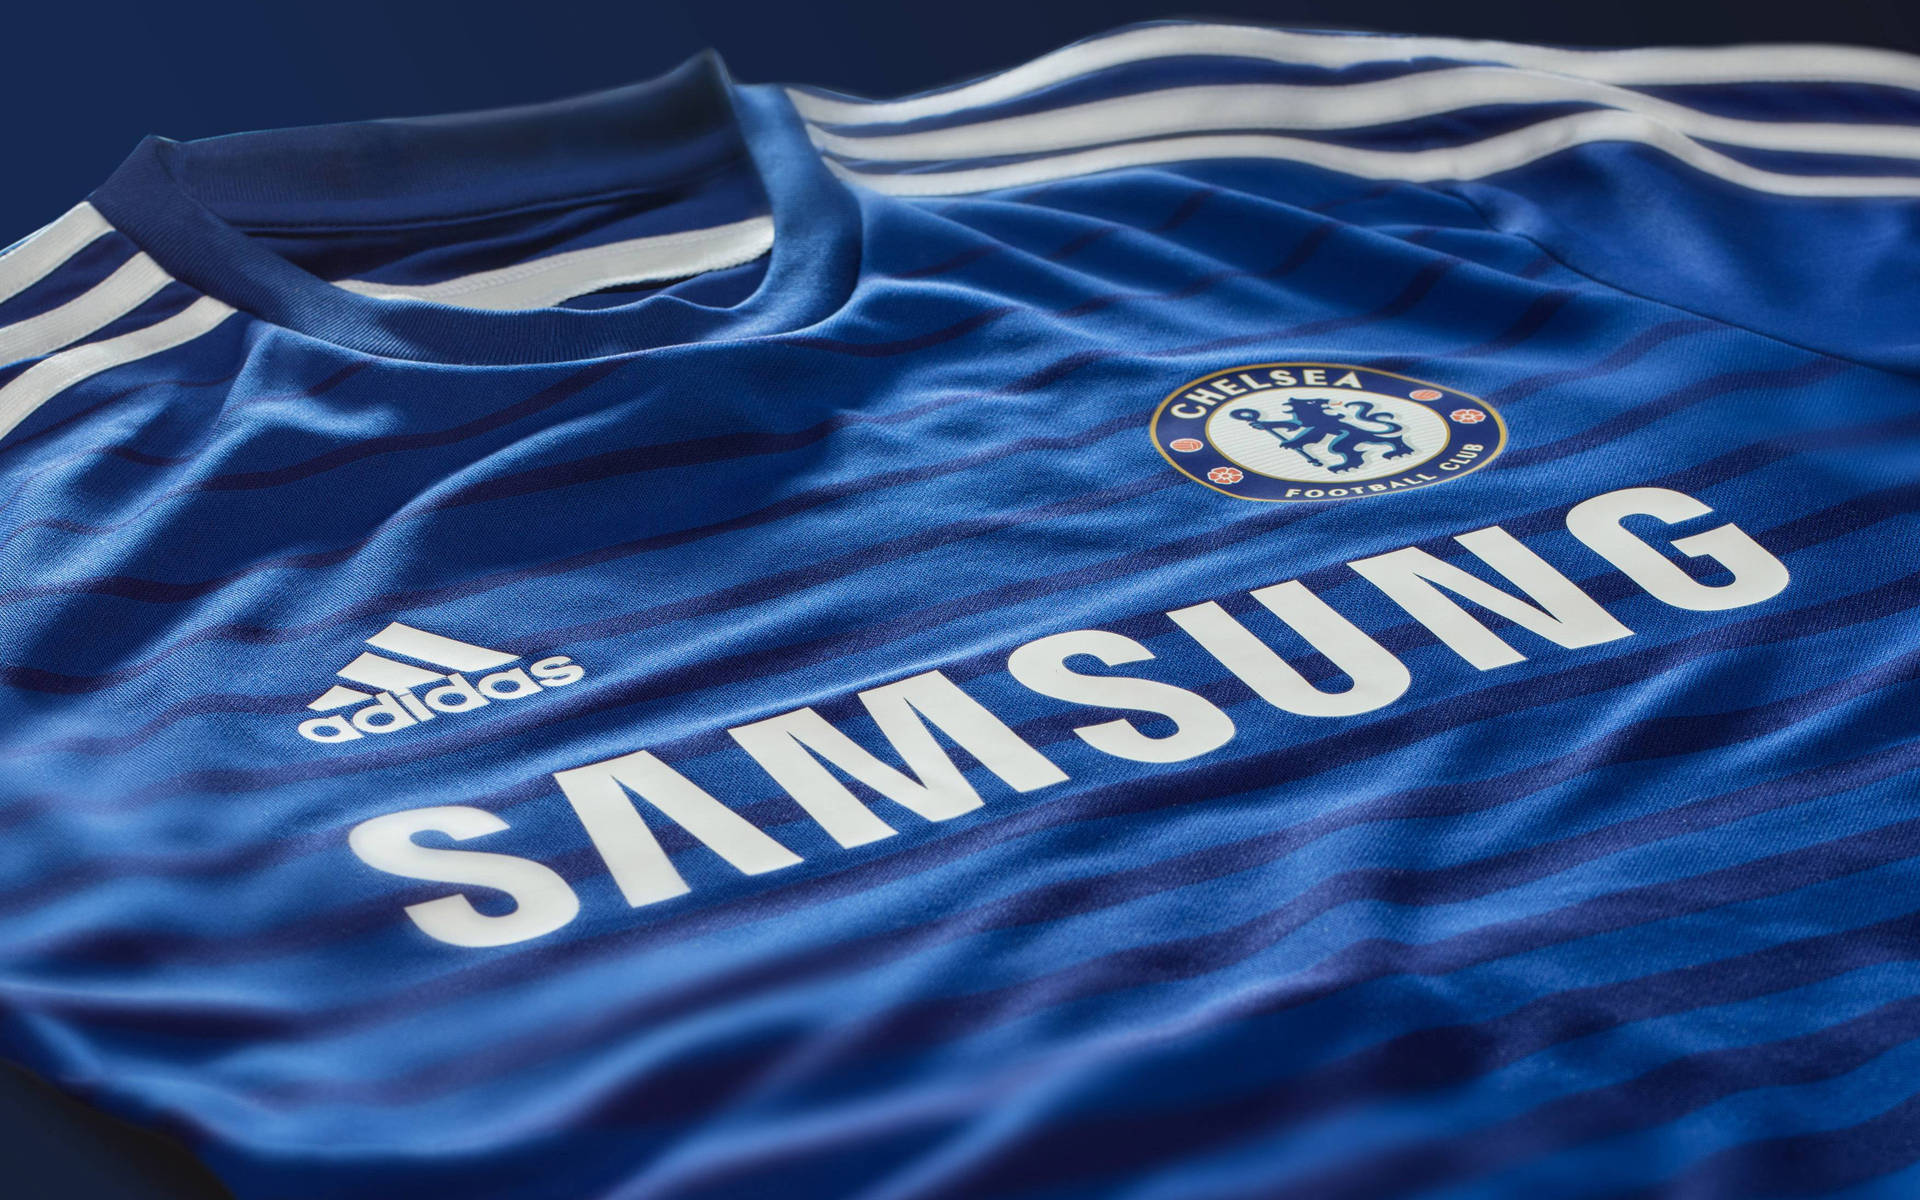 Chelsea Fc Jersey And Logo Wallpaper